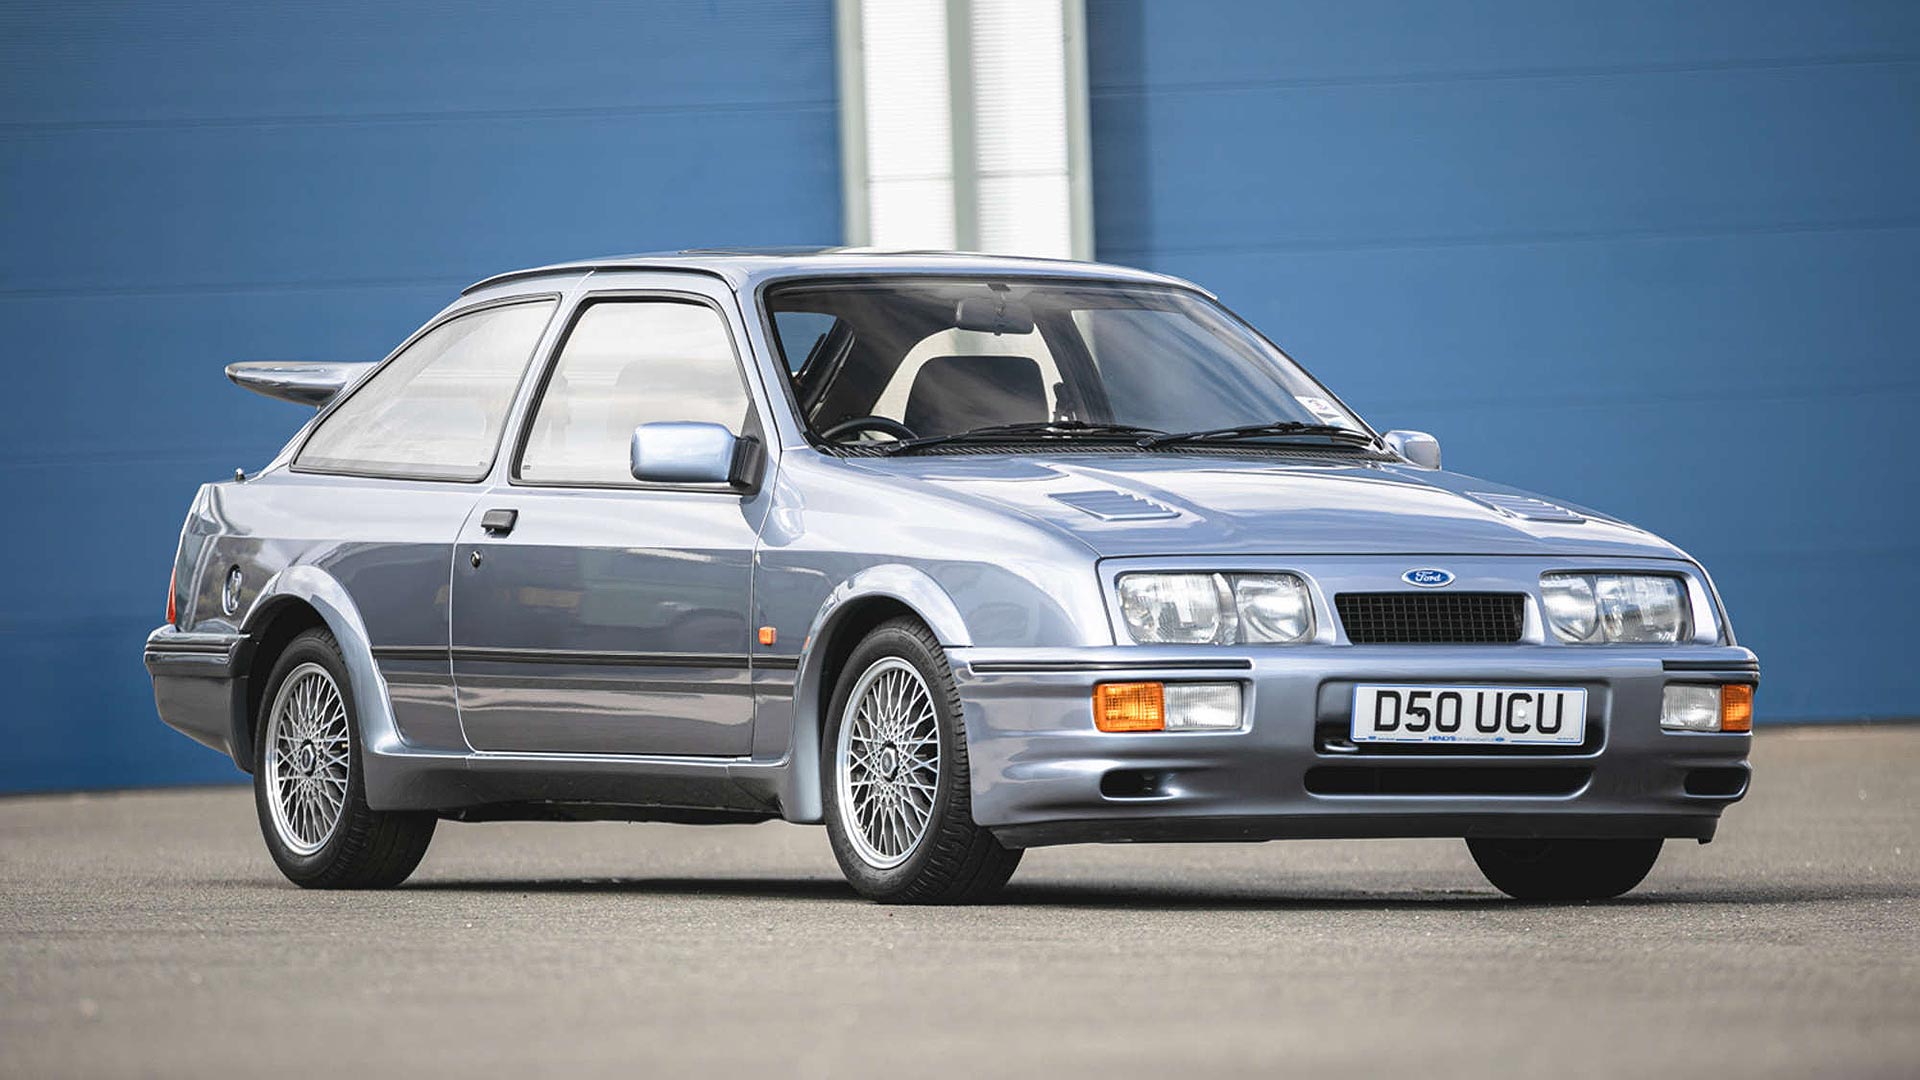 Coolest cars of the 1980s